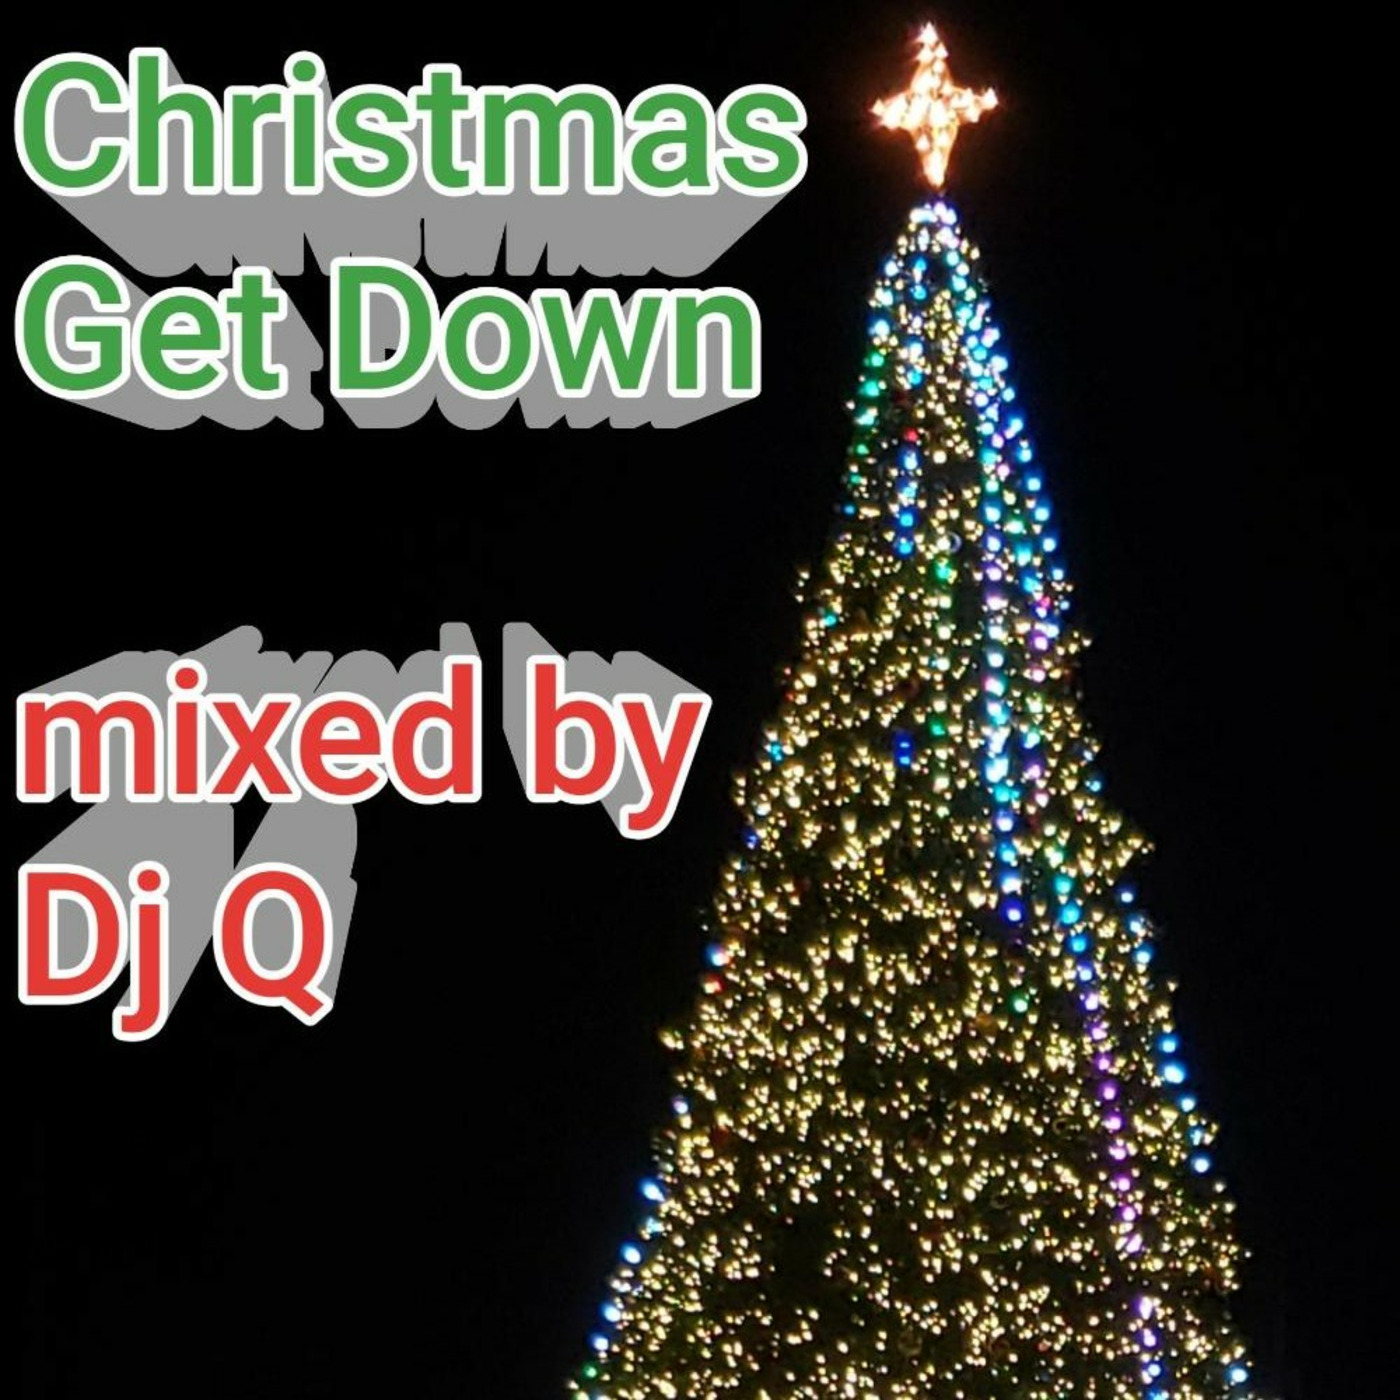 Episode 45: Christmas Get Down